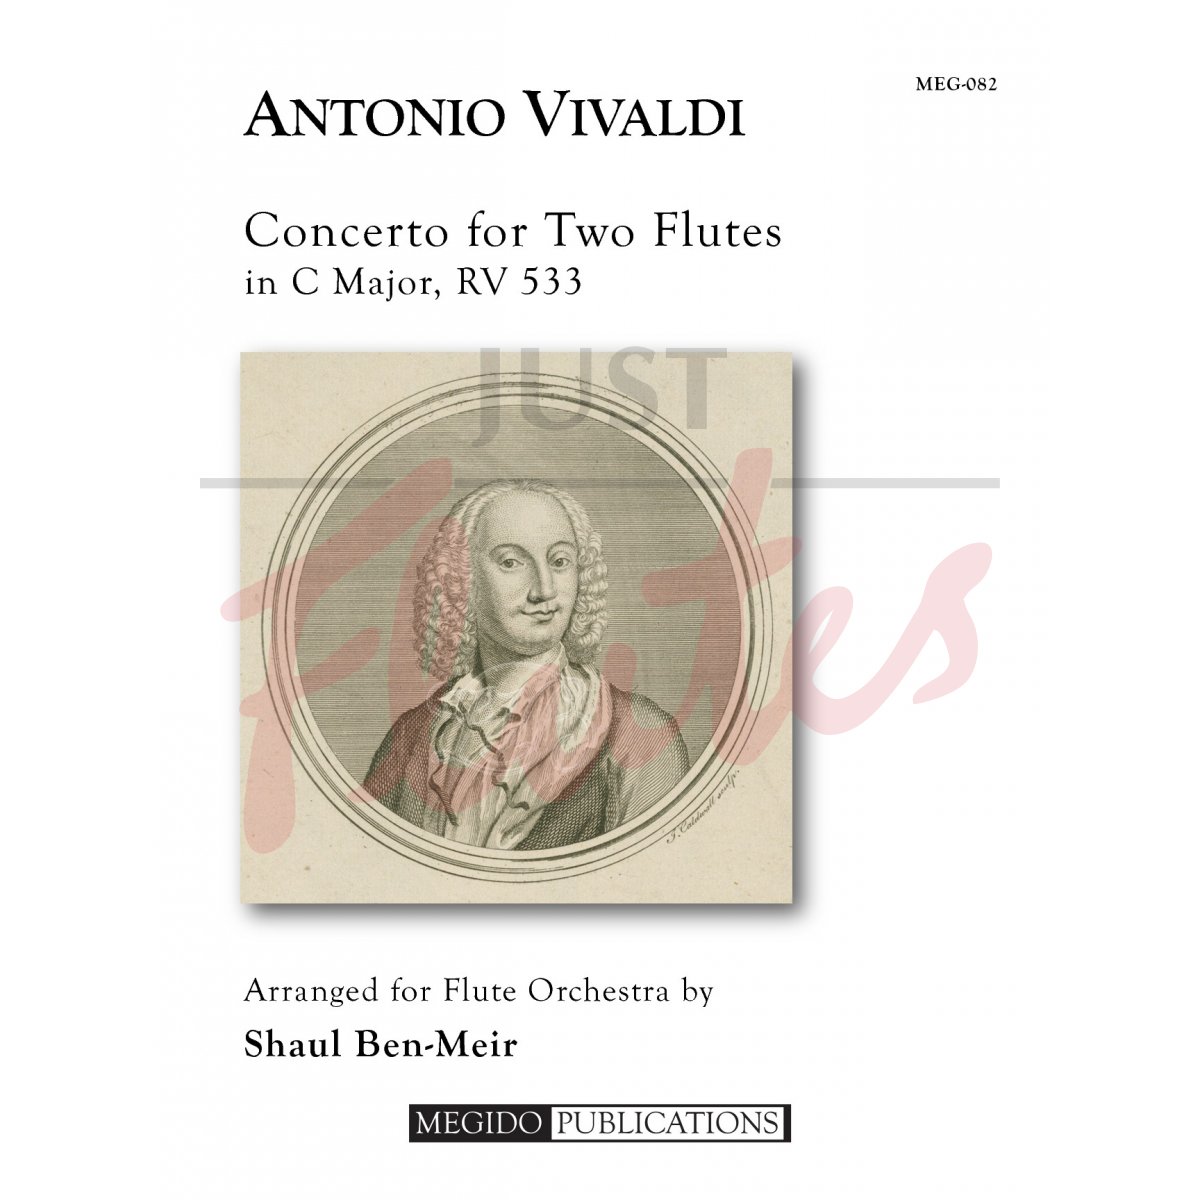 Concerto for Two Flutes in C major arranged for Flute Orchestra